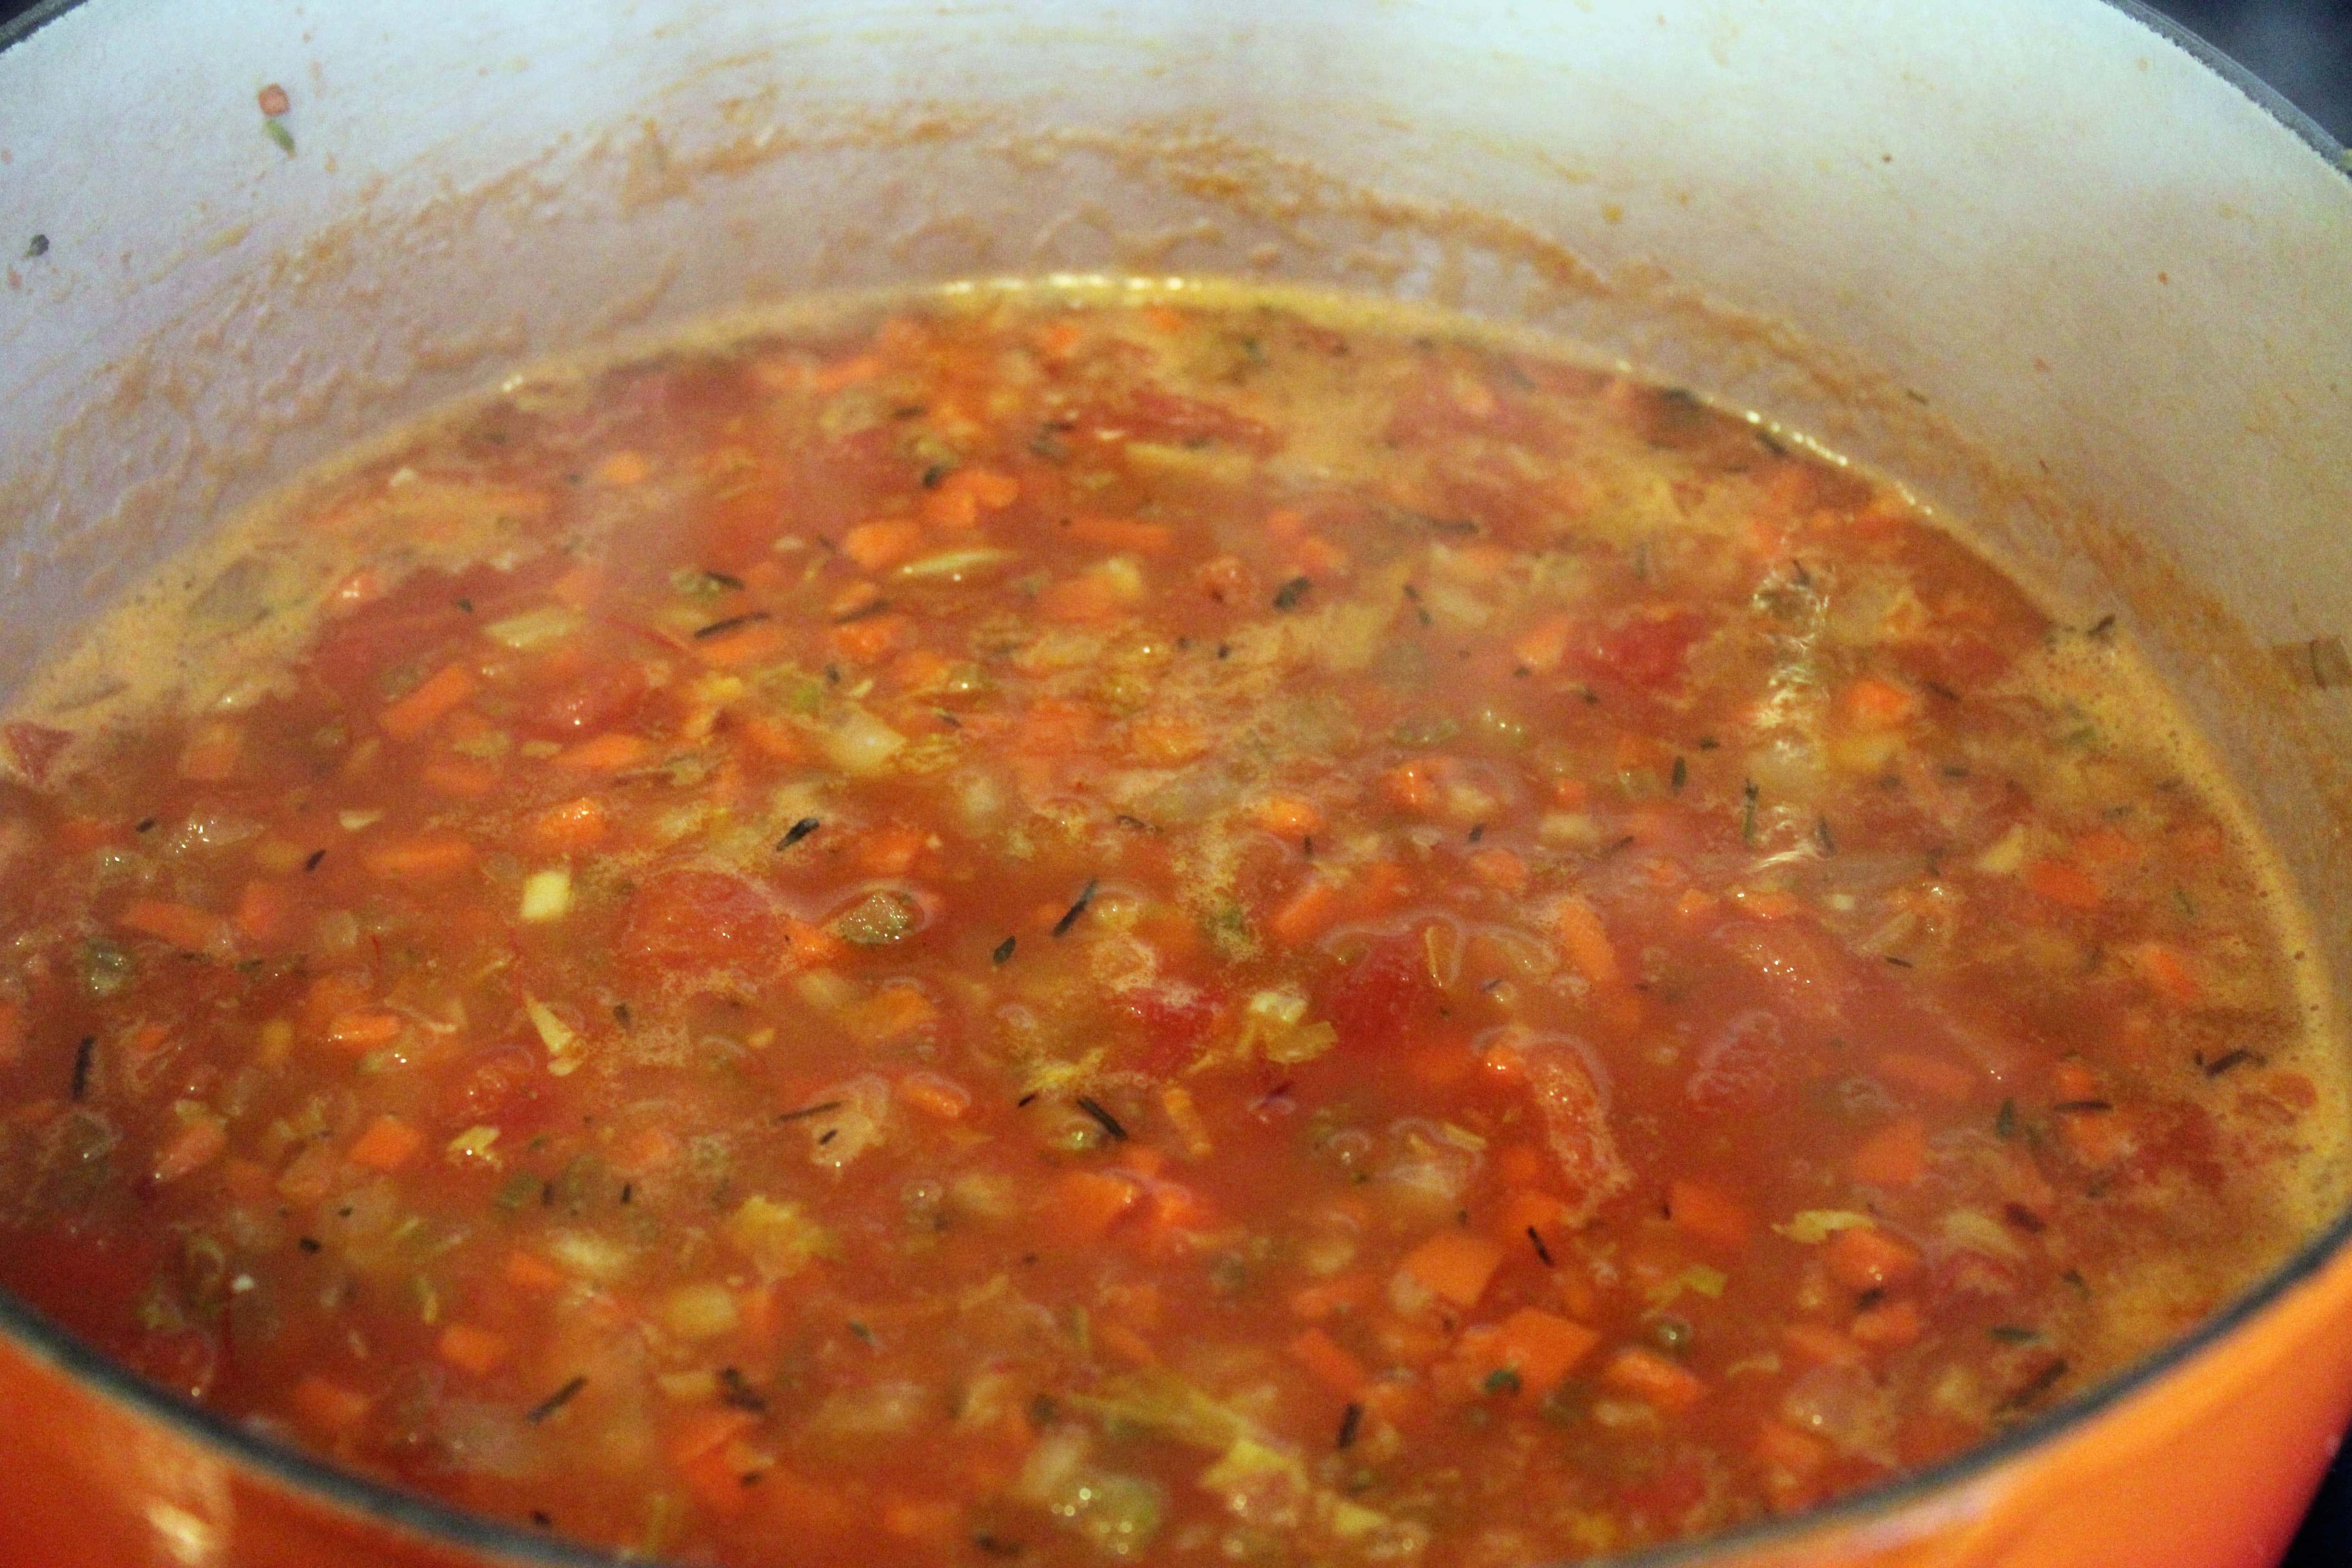 Let sauce simmer for 2 minutes before adding meat